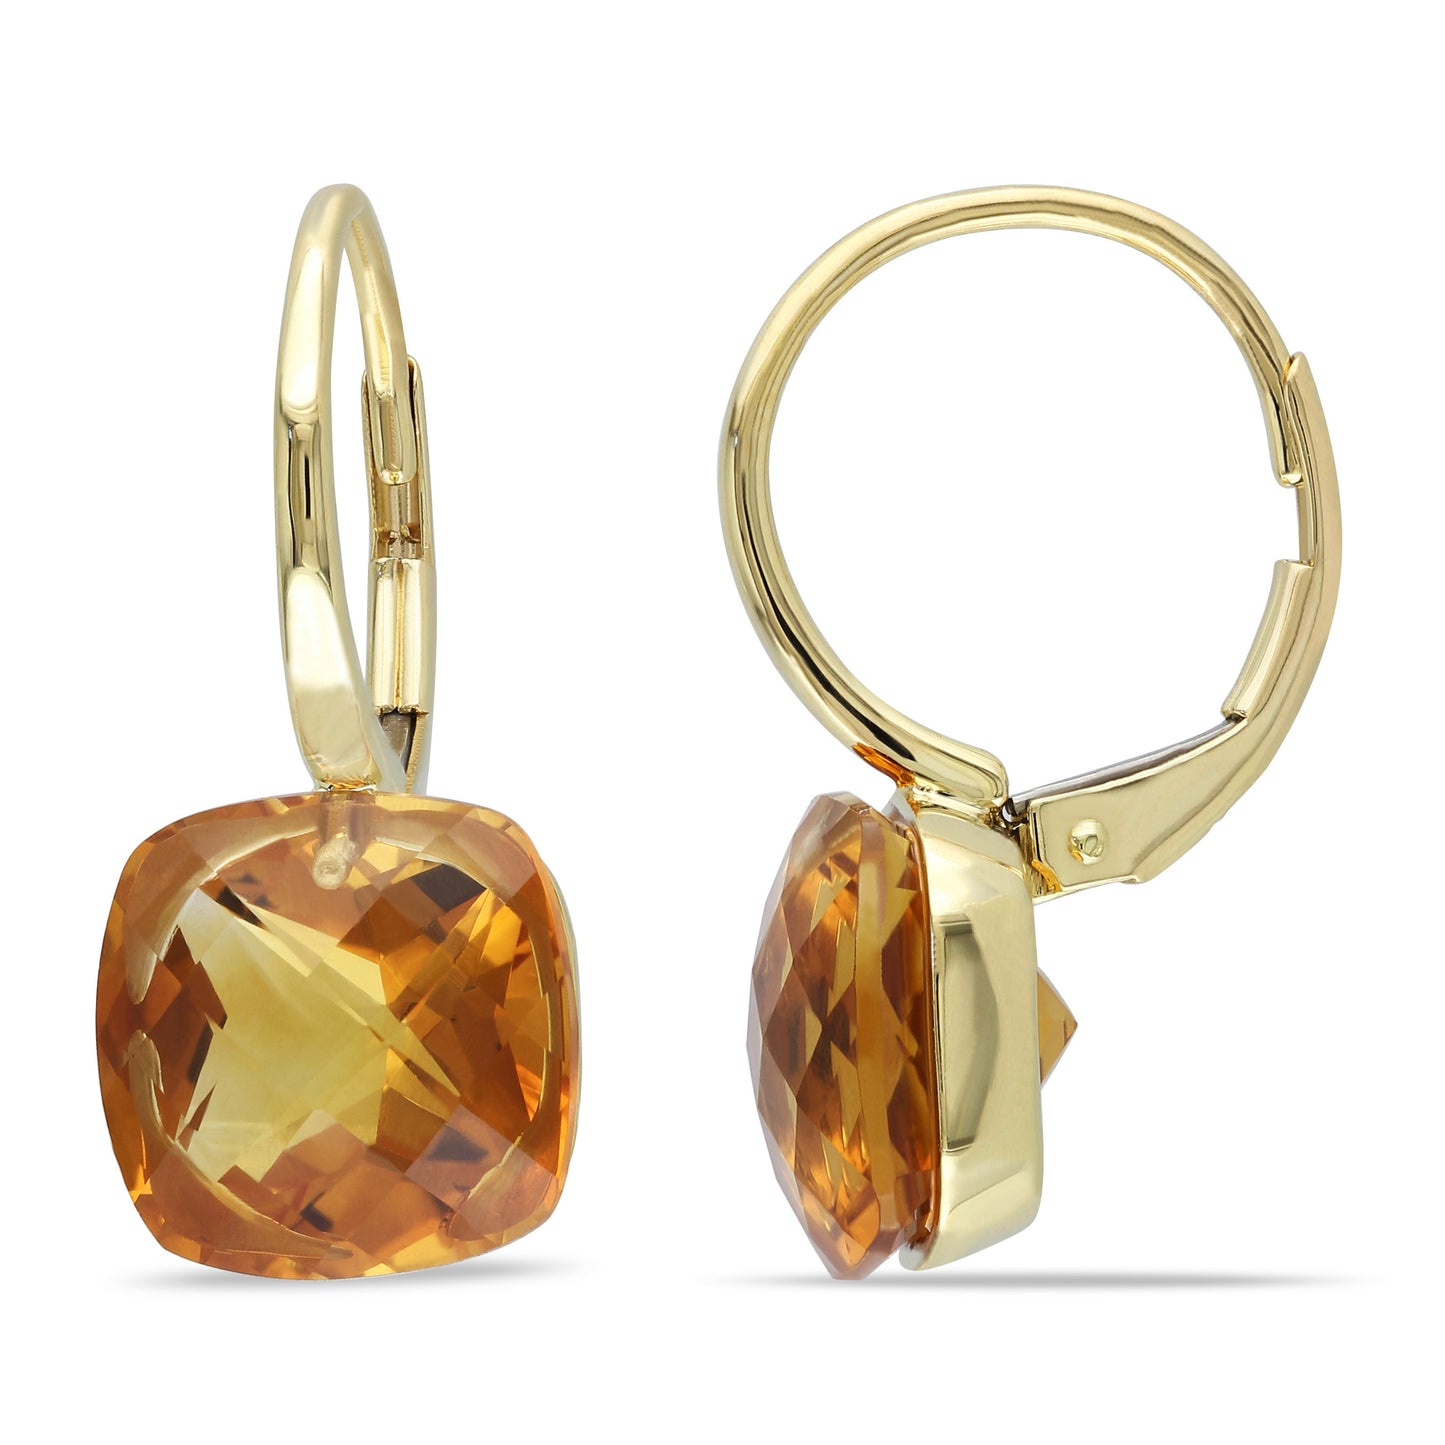 8ct Madeira Citrine LeverBack Earrings in 14k Yellow Gold